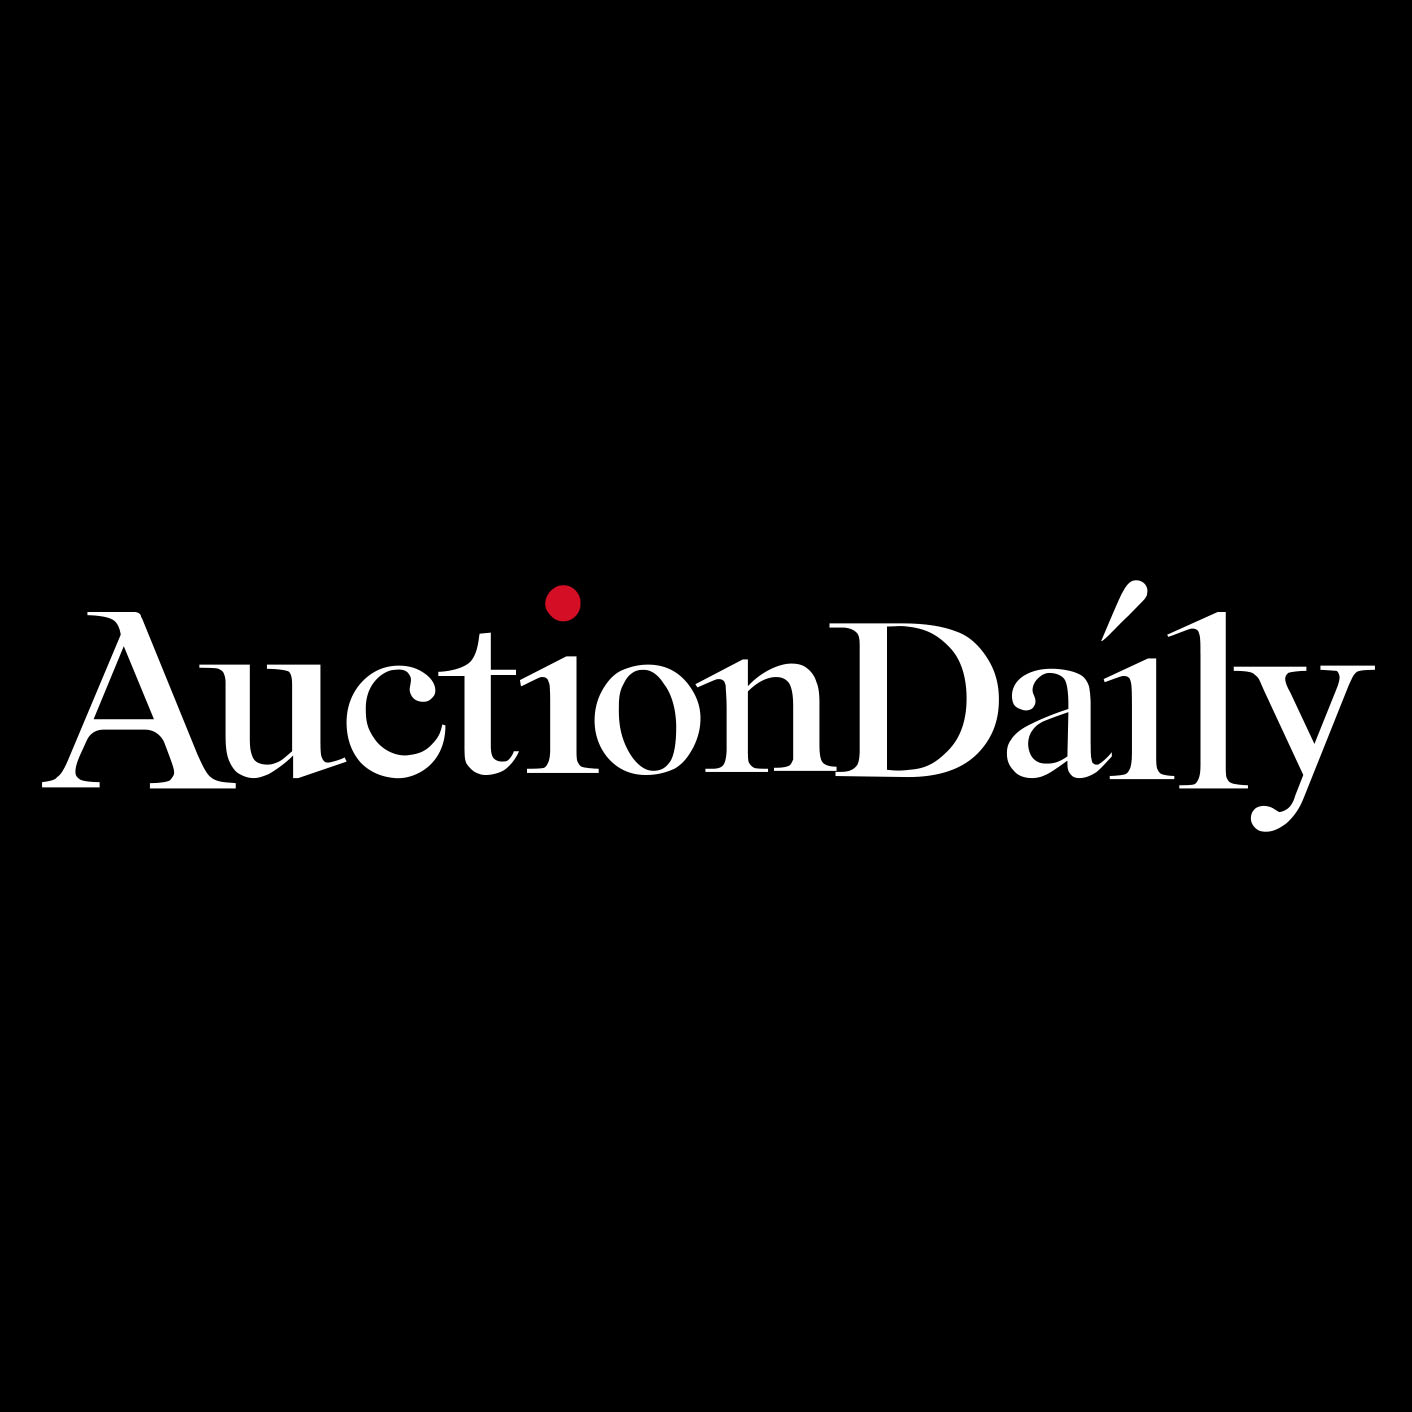 AuctionDaily - Auction Previews, News & Press Release